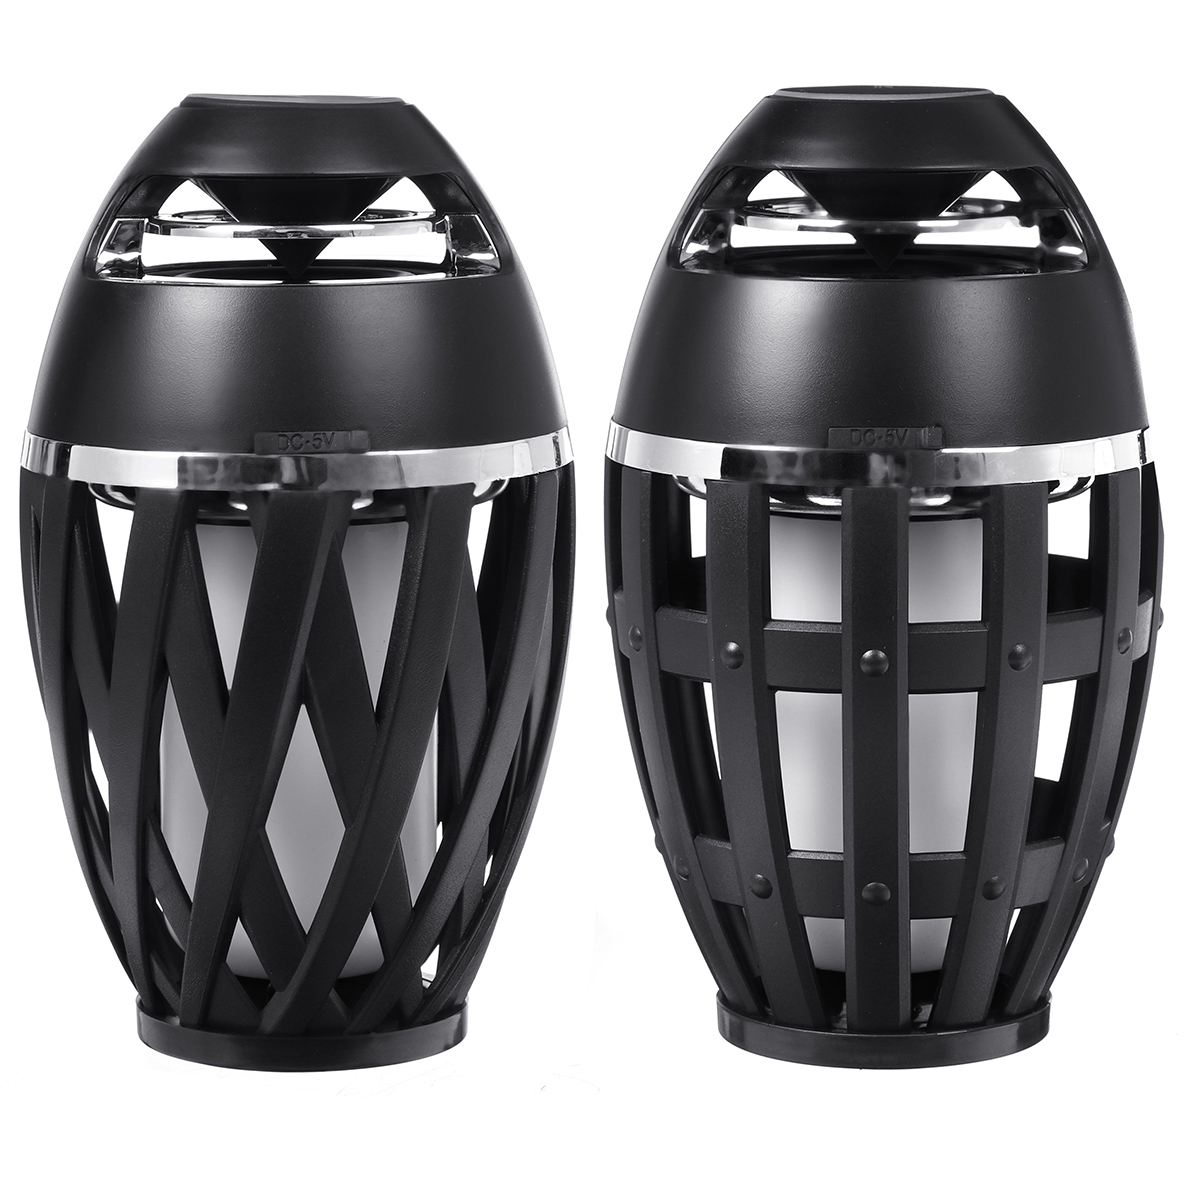 Outdoor-bluetooth-Speaker-LED-Flame-Light-Table-Lamp-Torch-Atmosphere-Bright-Night-Light-DC5V-1730264-4